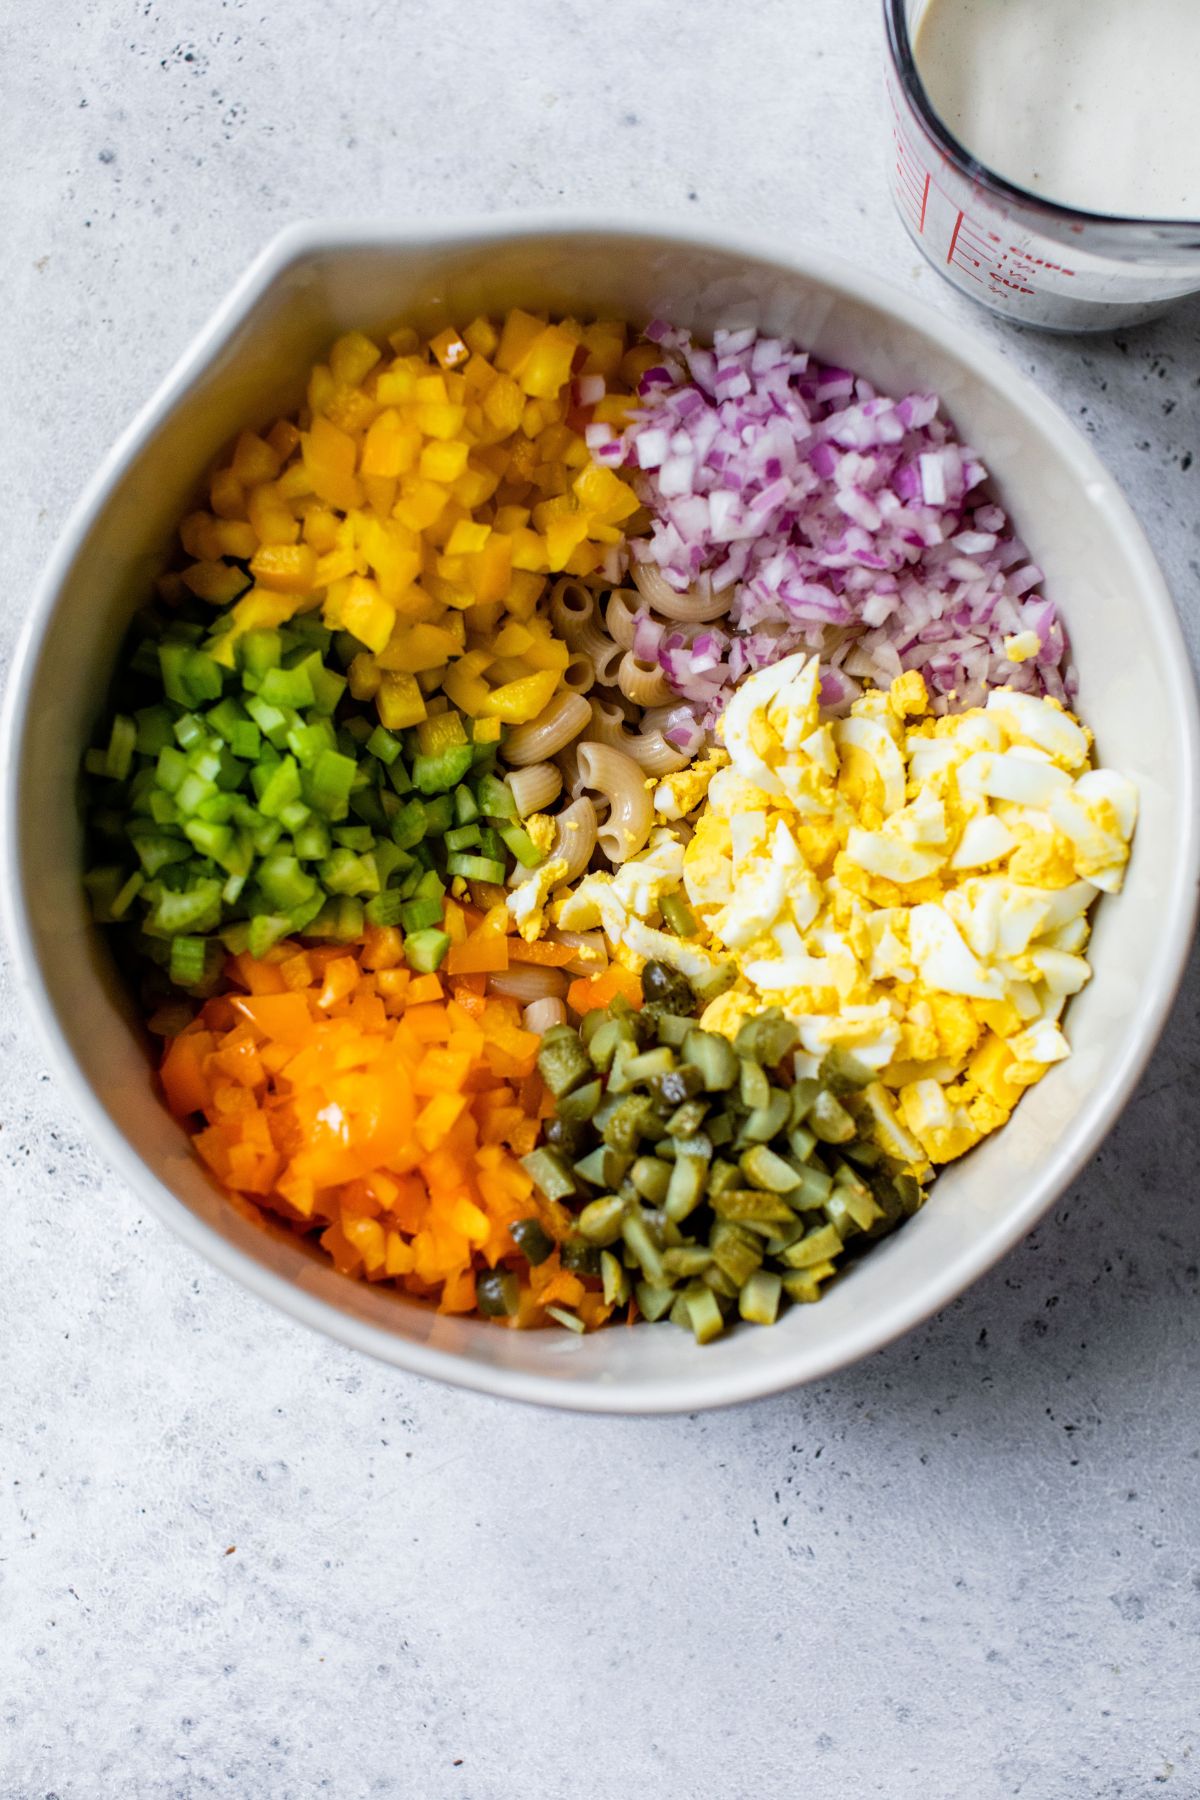 Combining macaroni with veggies in a large bowl.